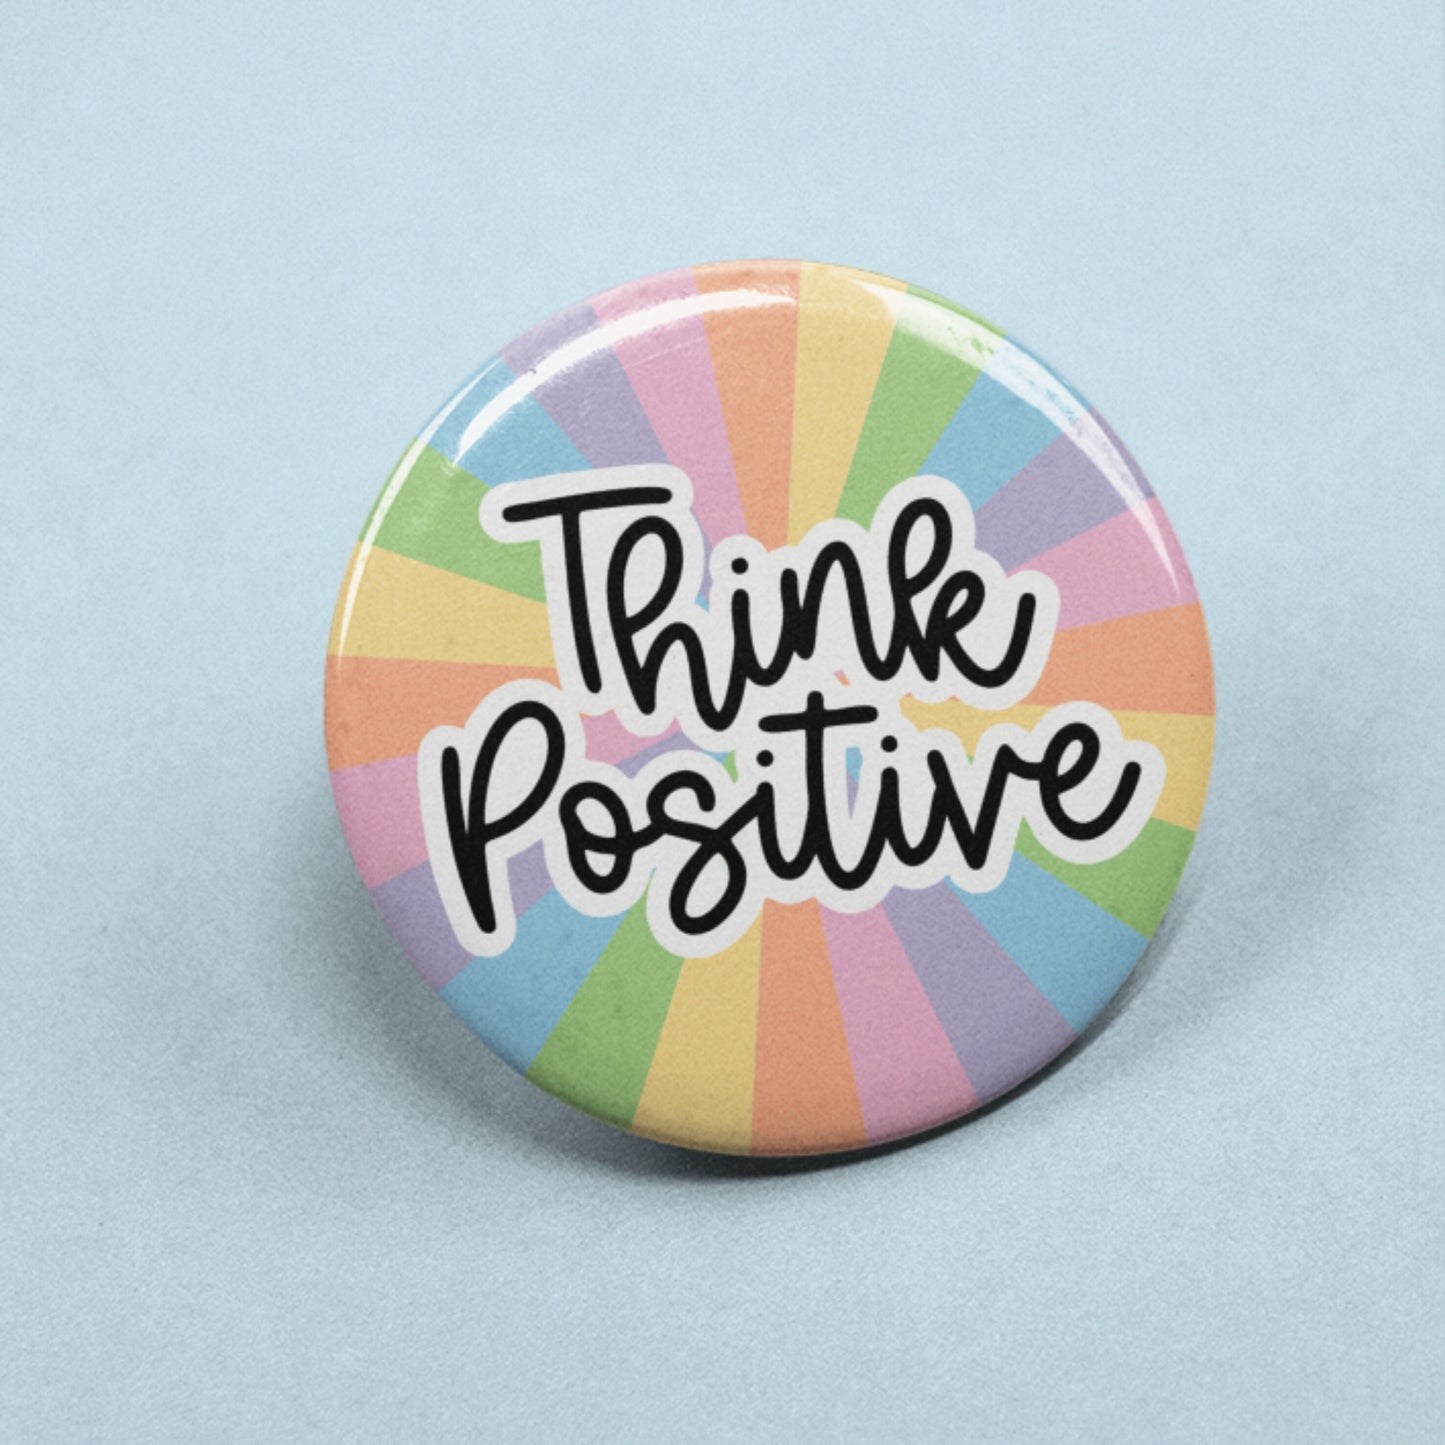 Think Positive - Pin Badge | Self Care Pin, Positive Thinking, Positivity Gift